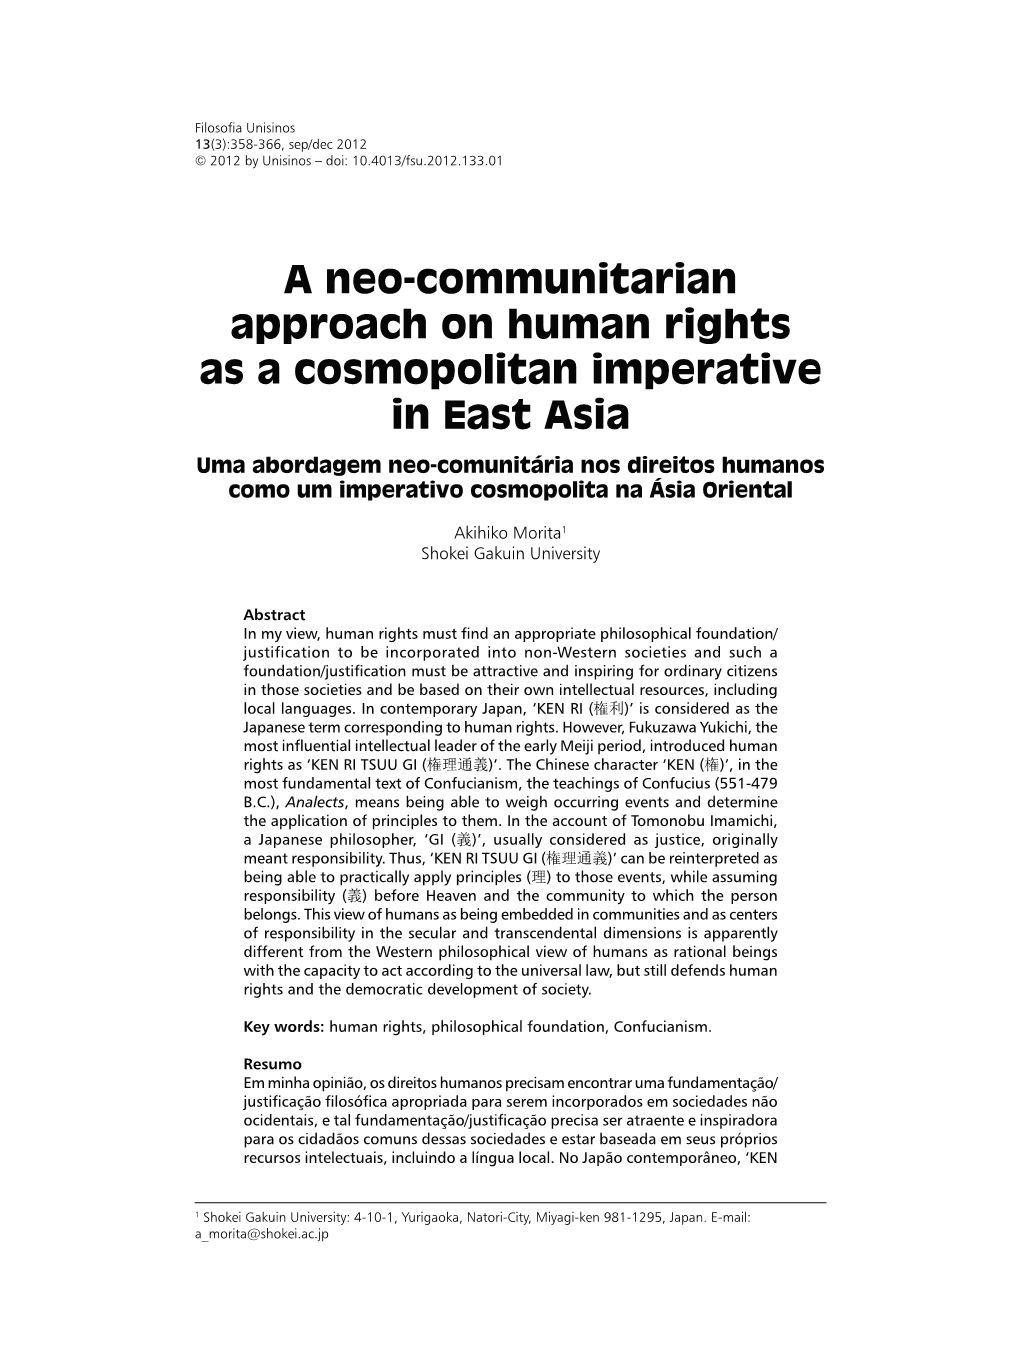 A Neo-Communitarian Approach on Human Rights As a Cosmopolitan Imperative in East Asia